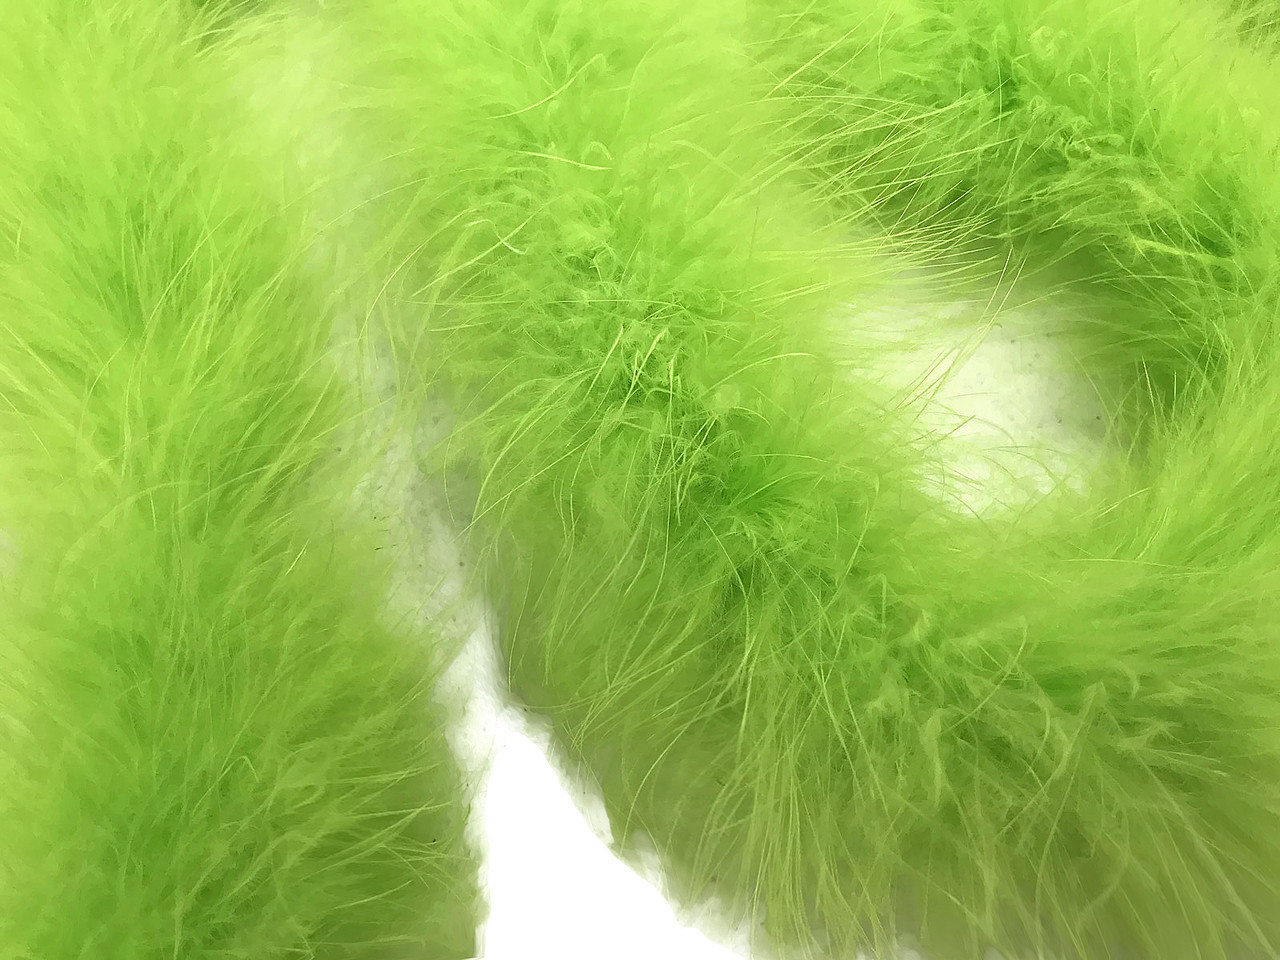 Pale Green Feathers, Large Marabou